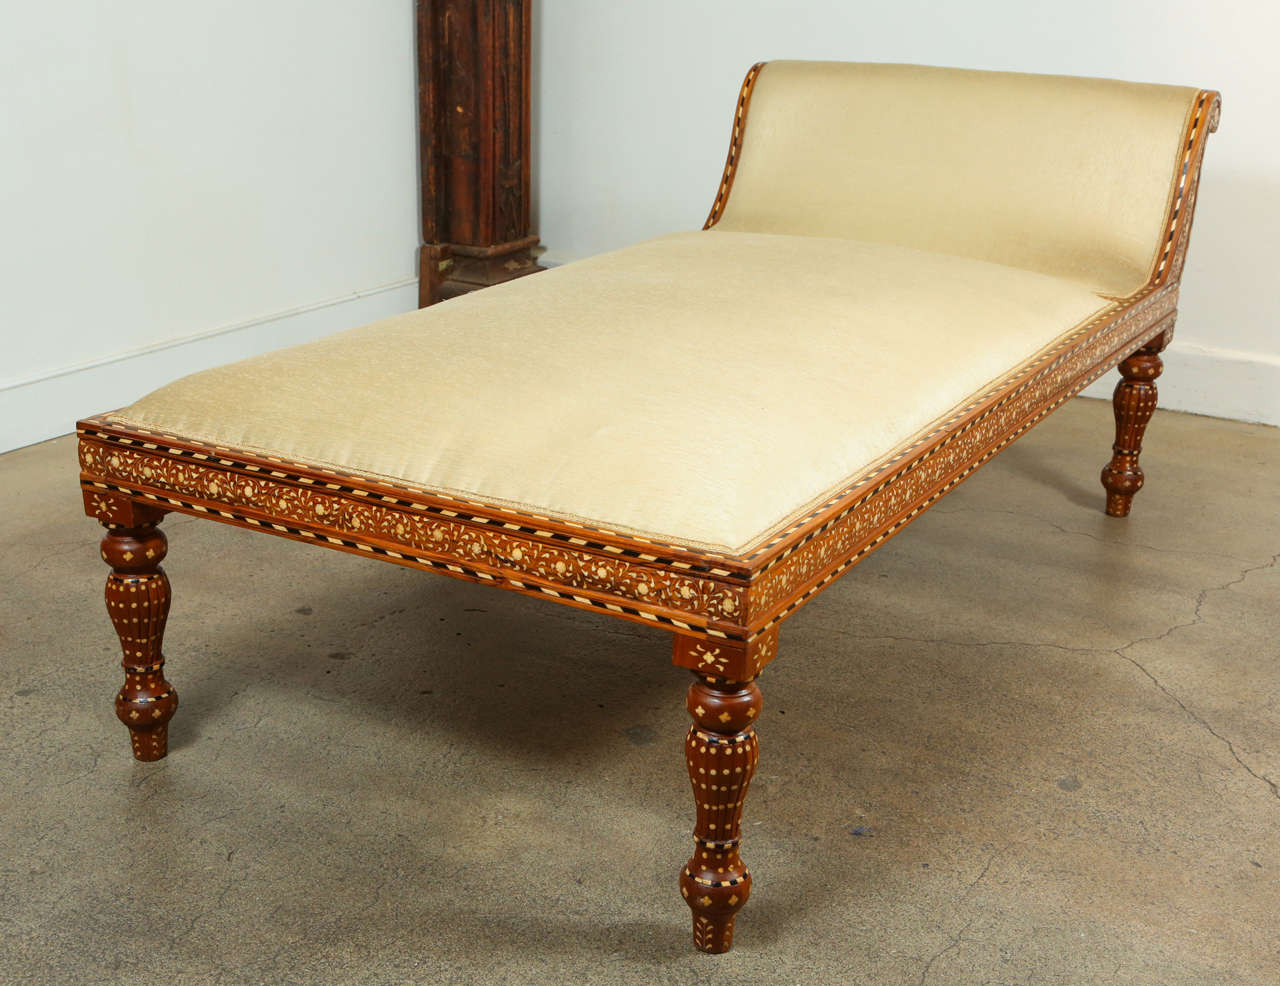 Large Anglo-Indian day bed, heavily inlaid with bone, turned legs, newly upholstered with ivory color silk fabric.
Egyptian Cleopatra style daybed with Moorish designs.